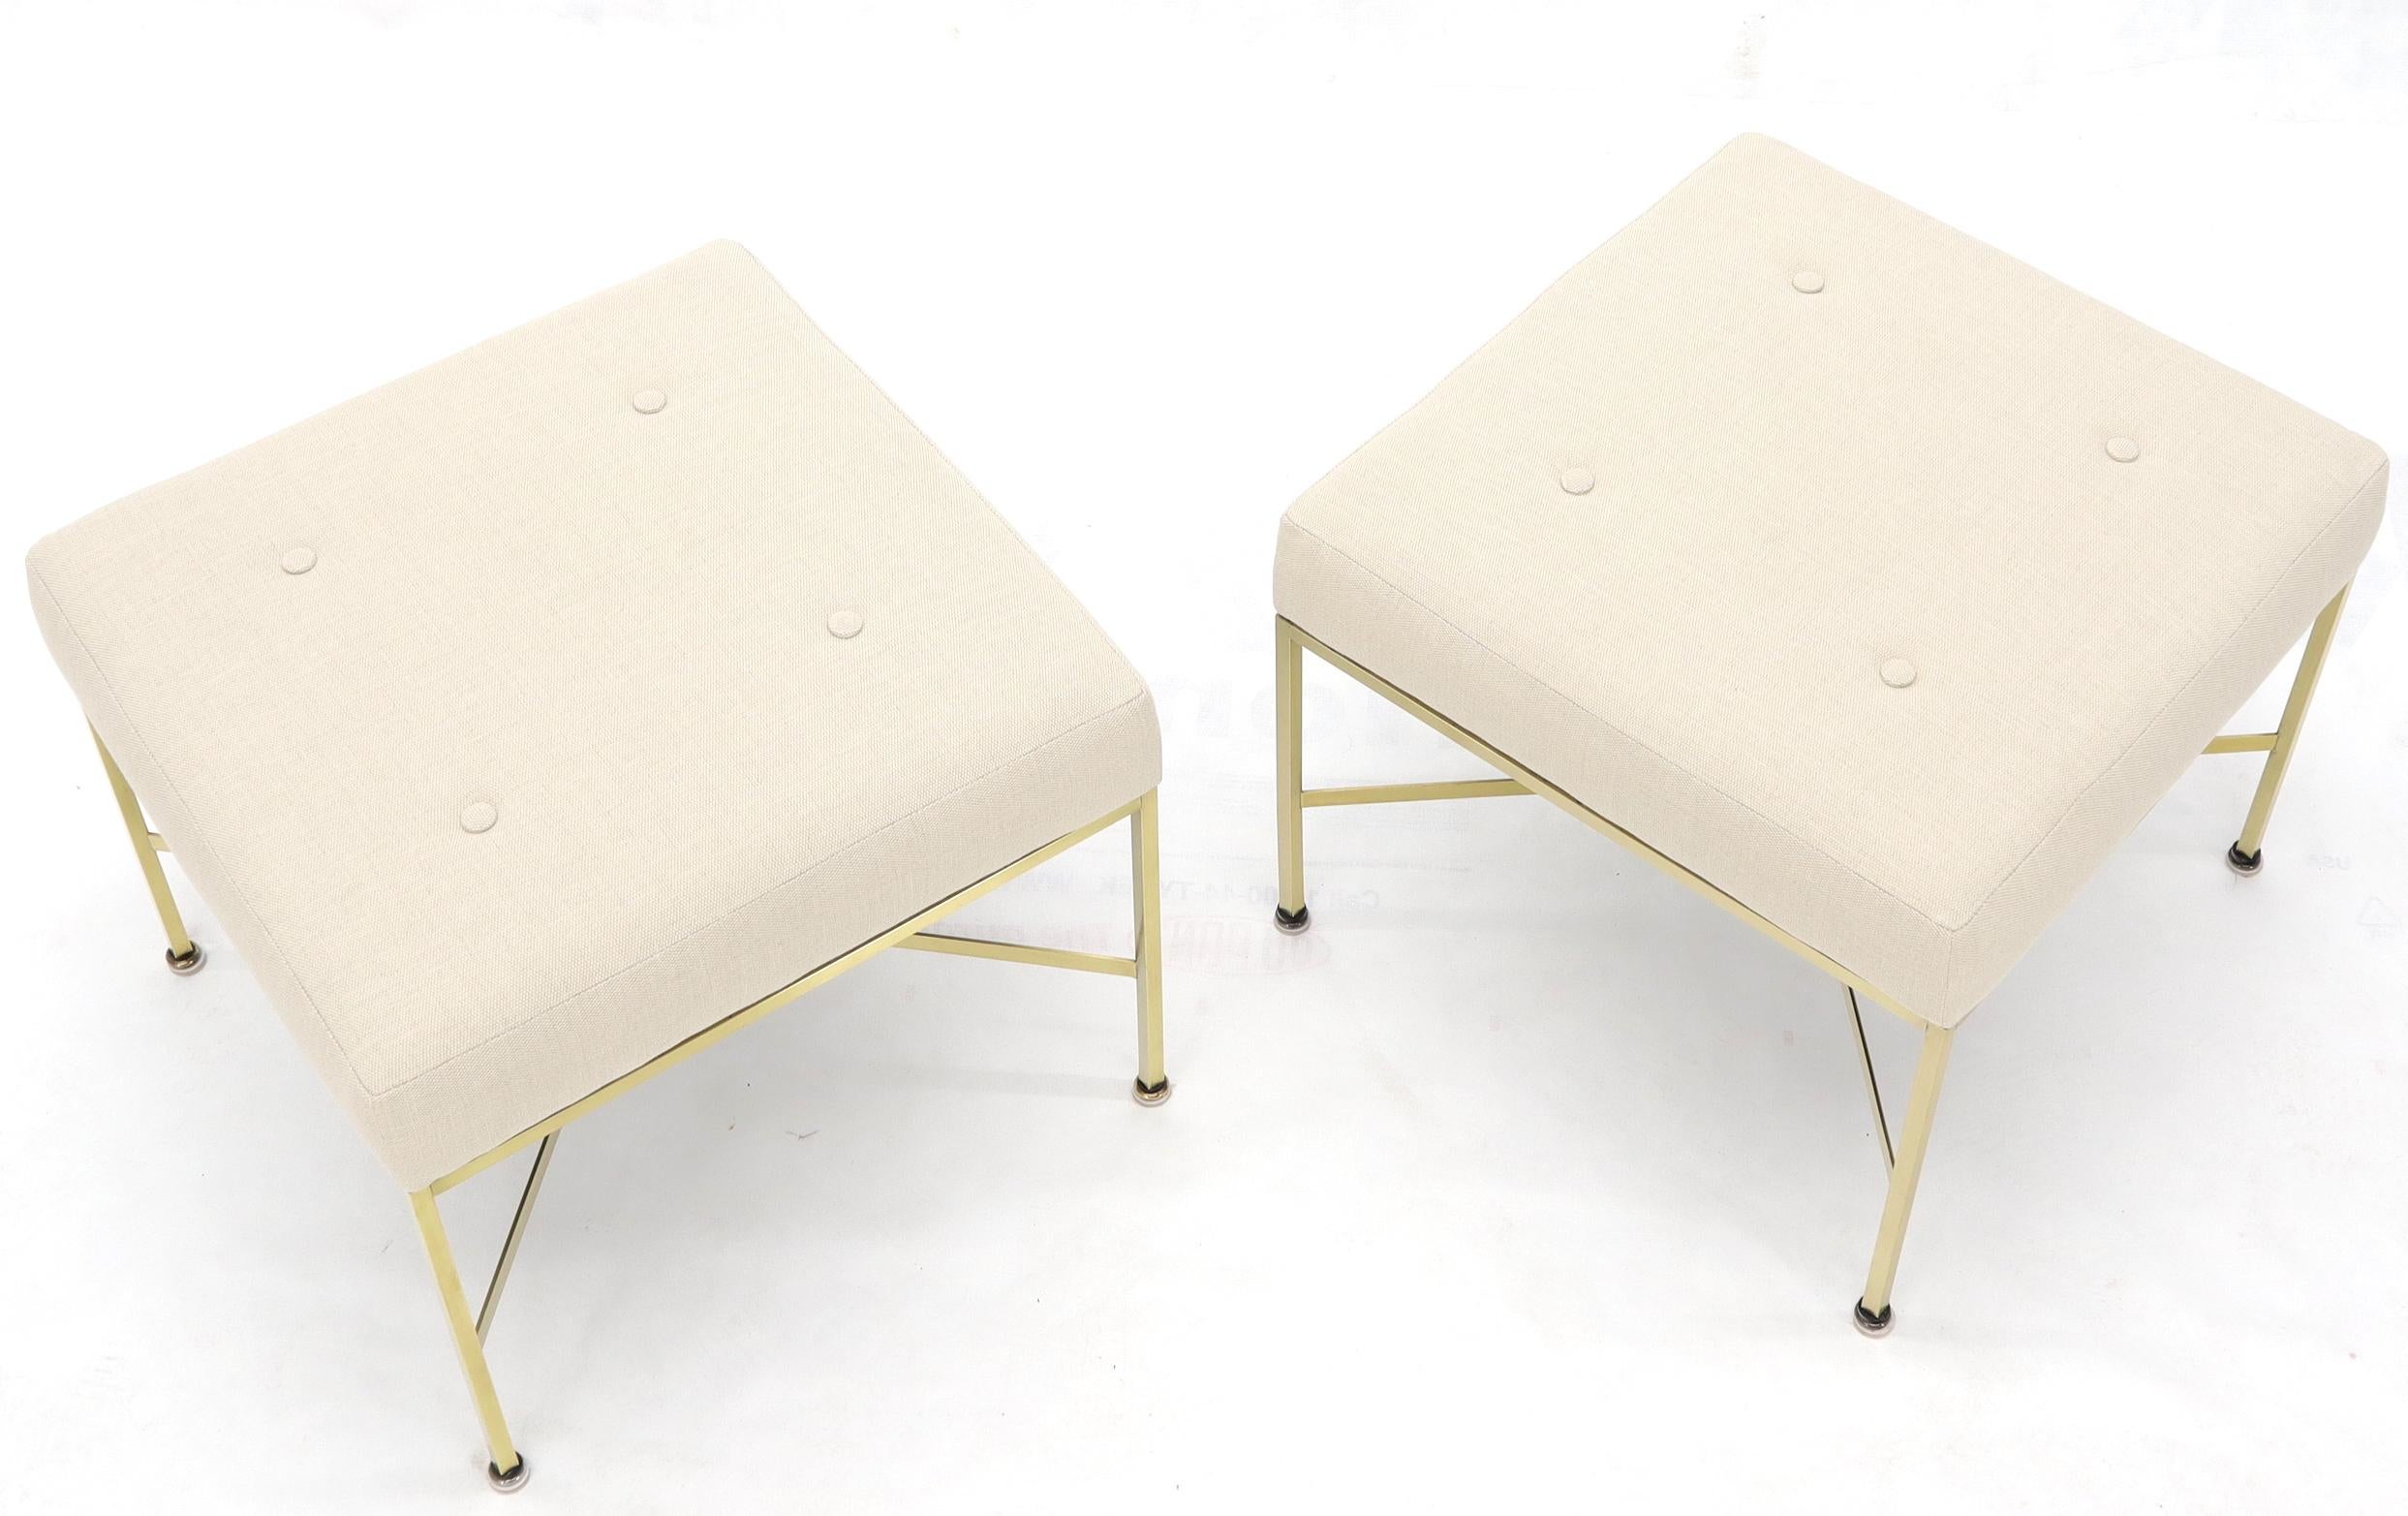 American Pair of New Upholstery Square Brass Frames Benches Stools by Paul McCobb